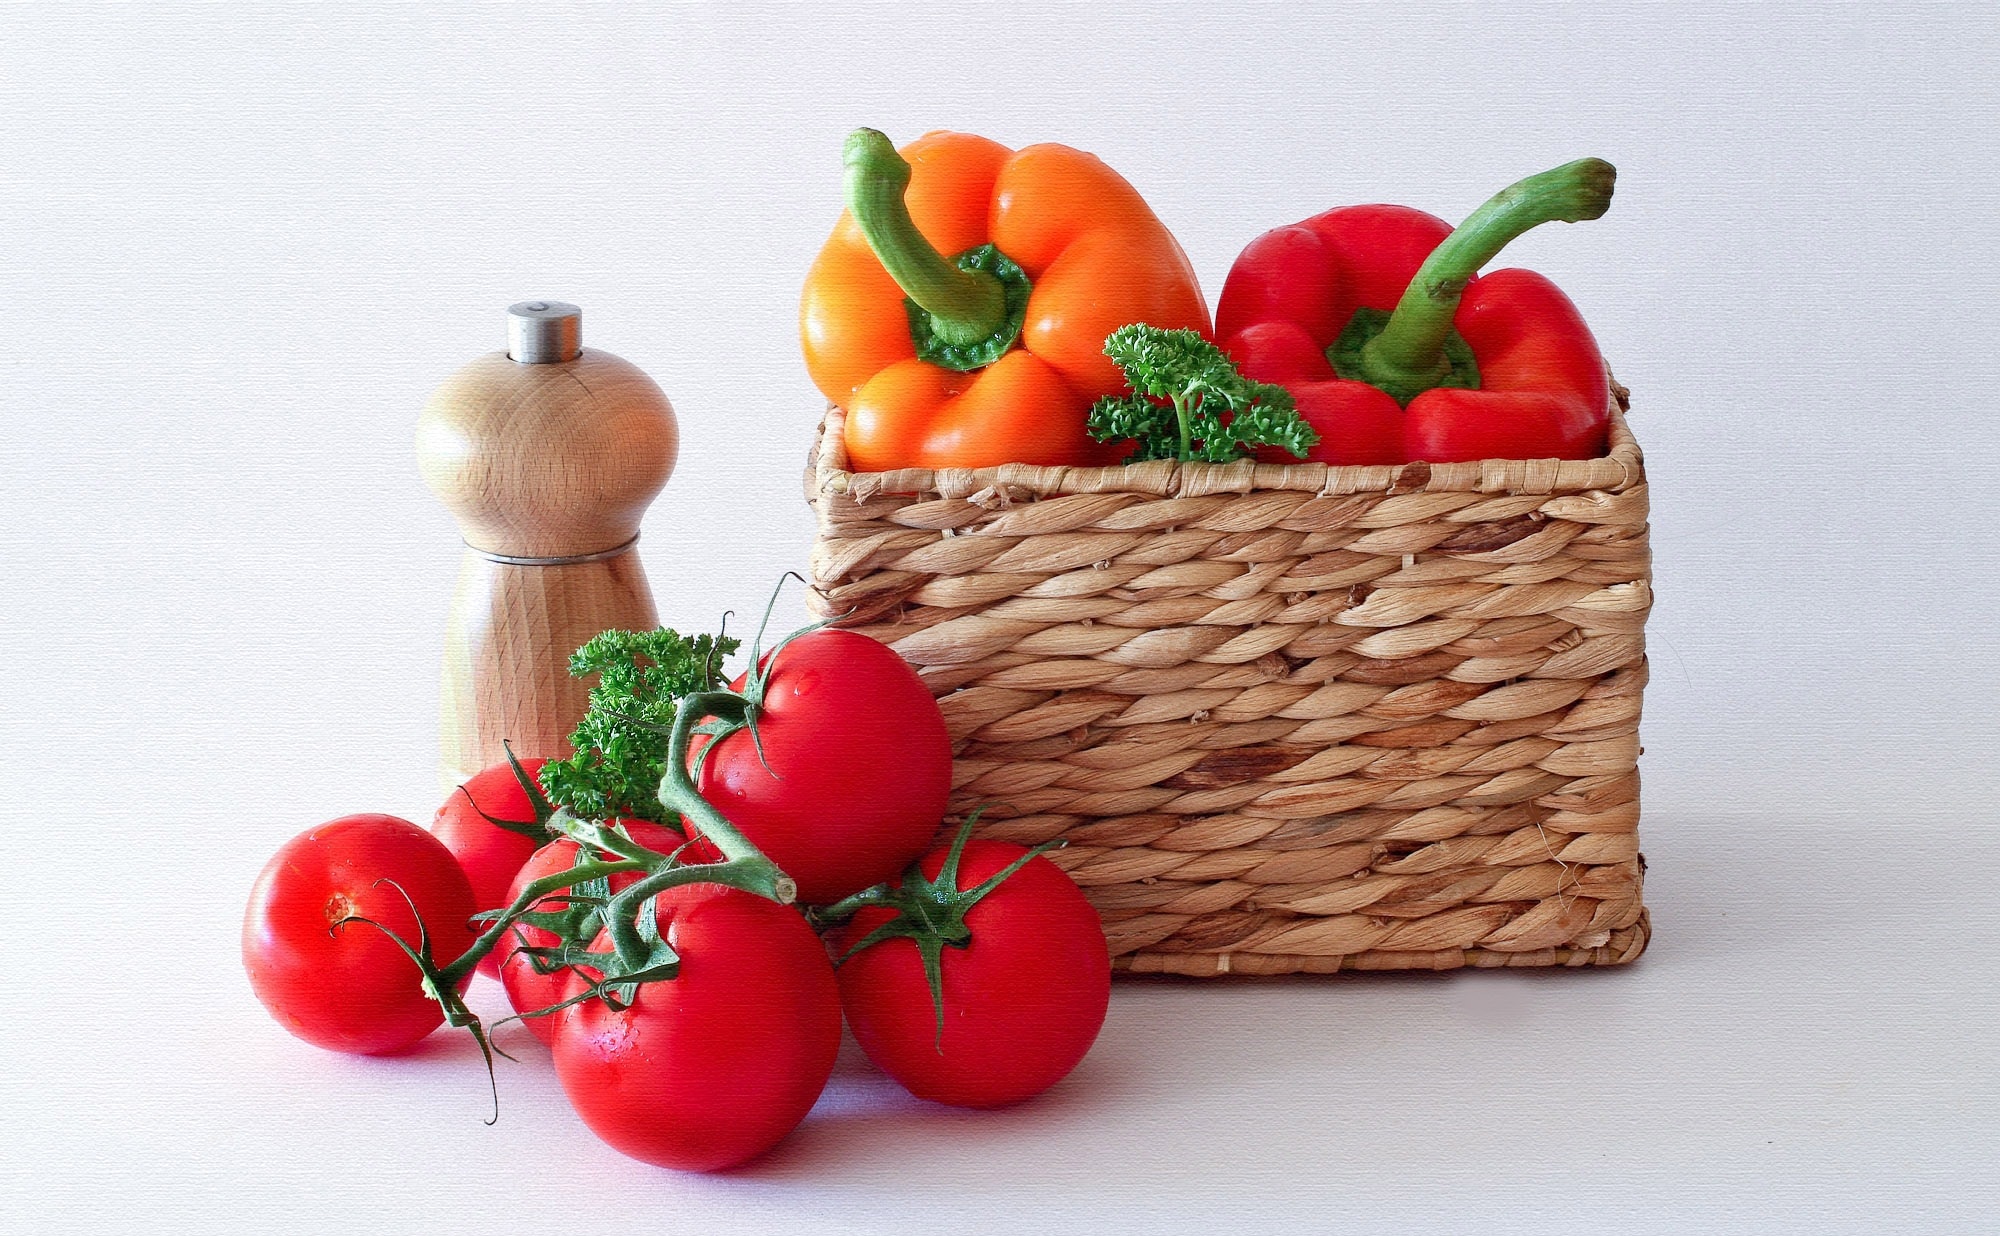 brown wicker basket, six red tomatoes, two orange and red bell peppers